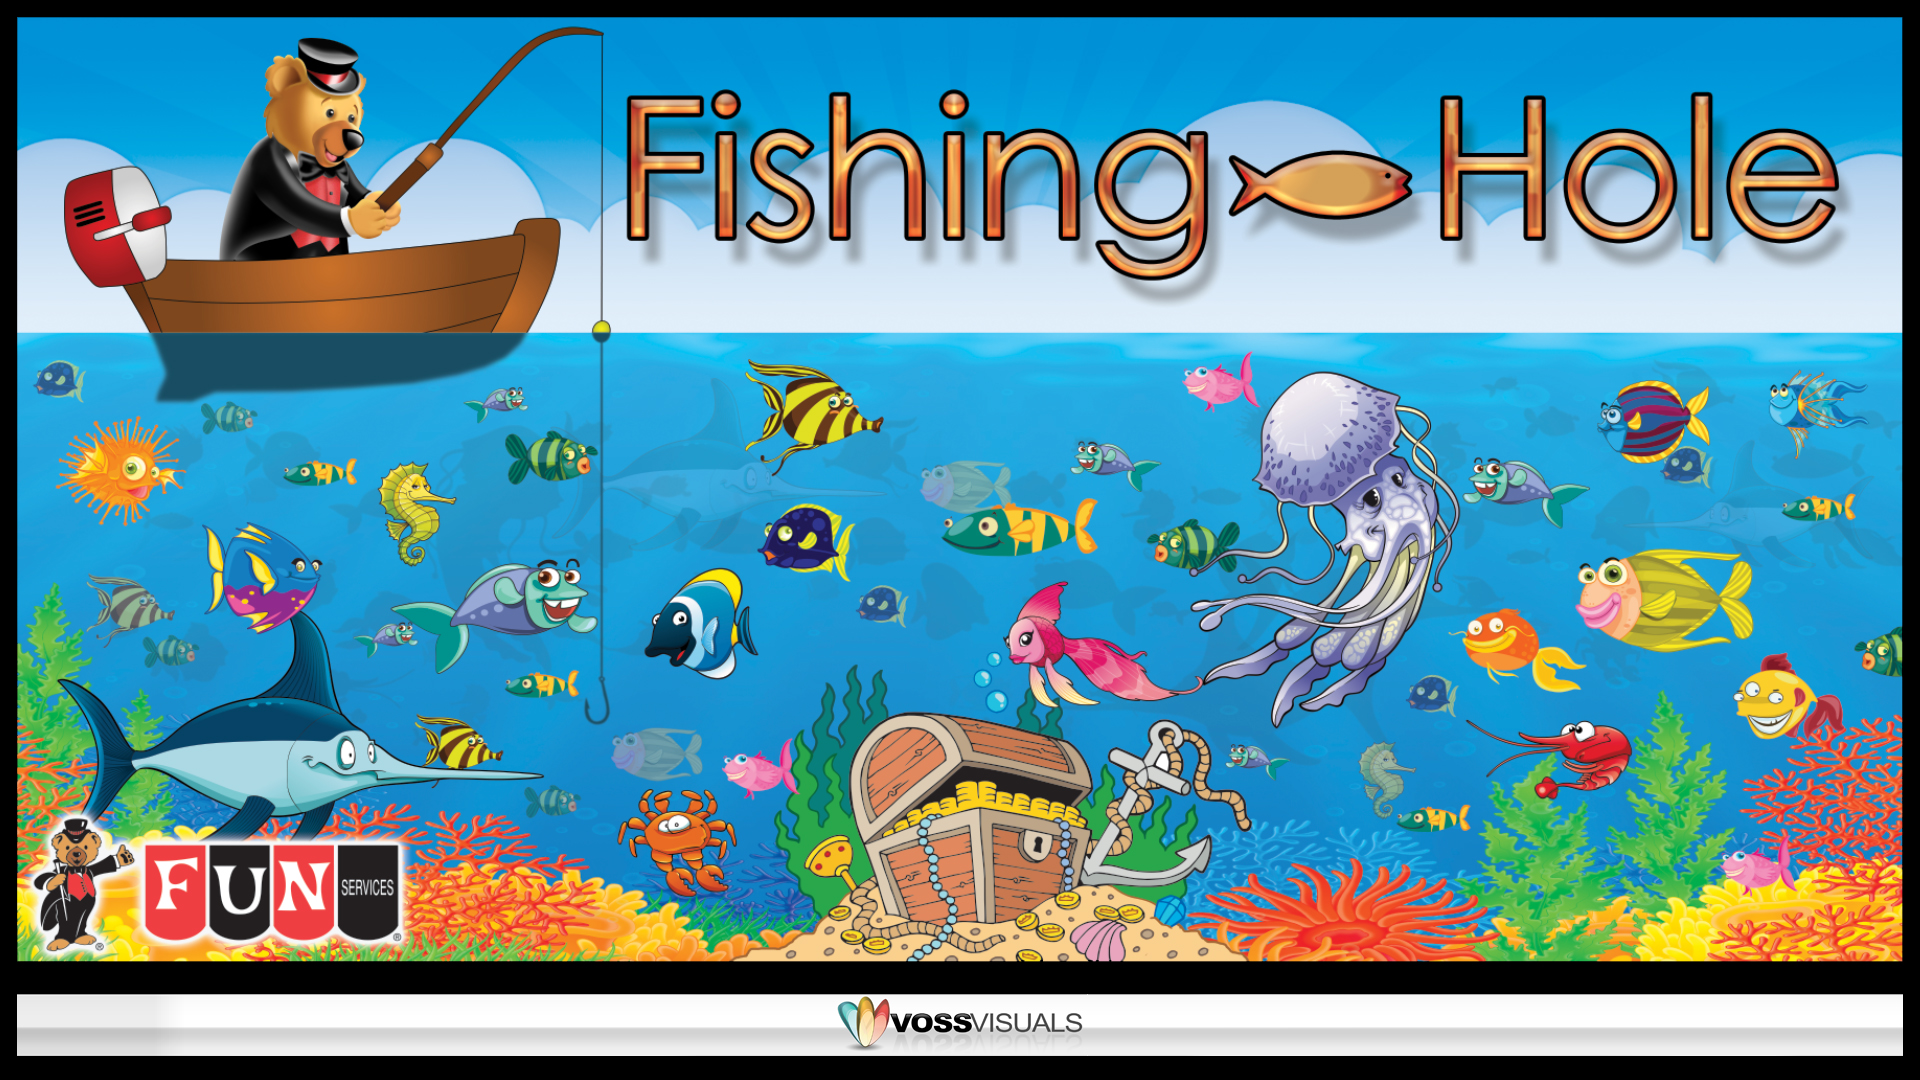 Fishing Hole Fun Services Midwest